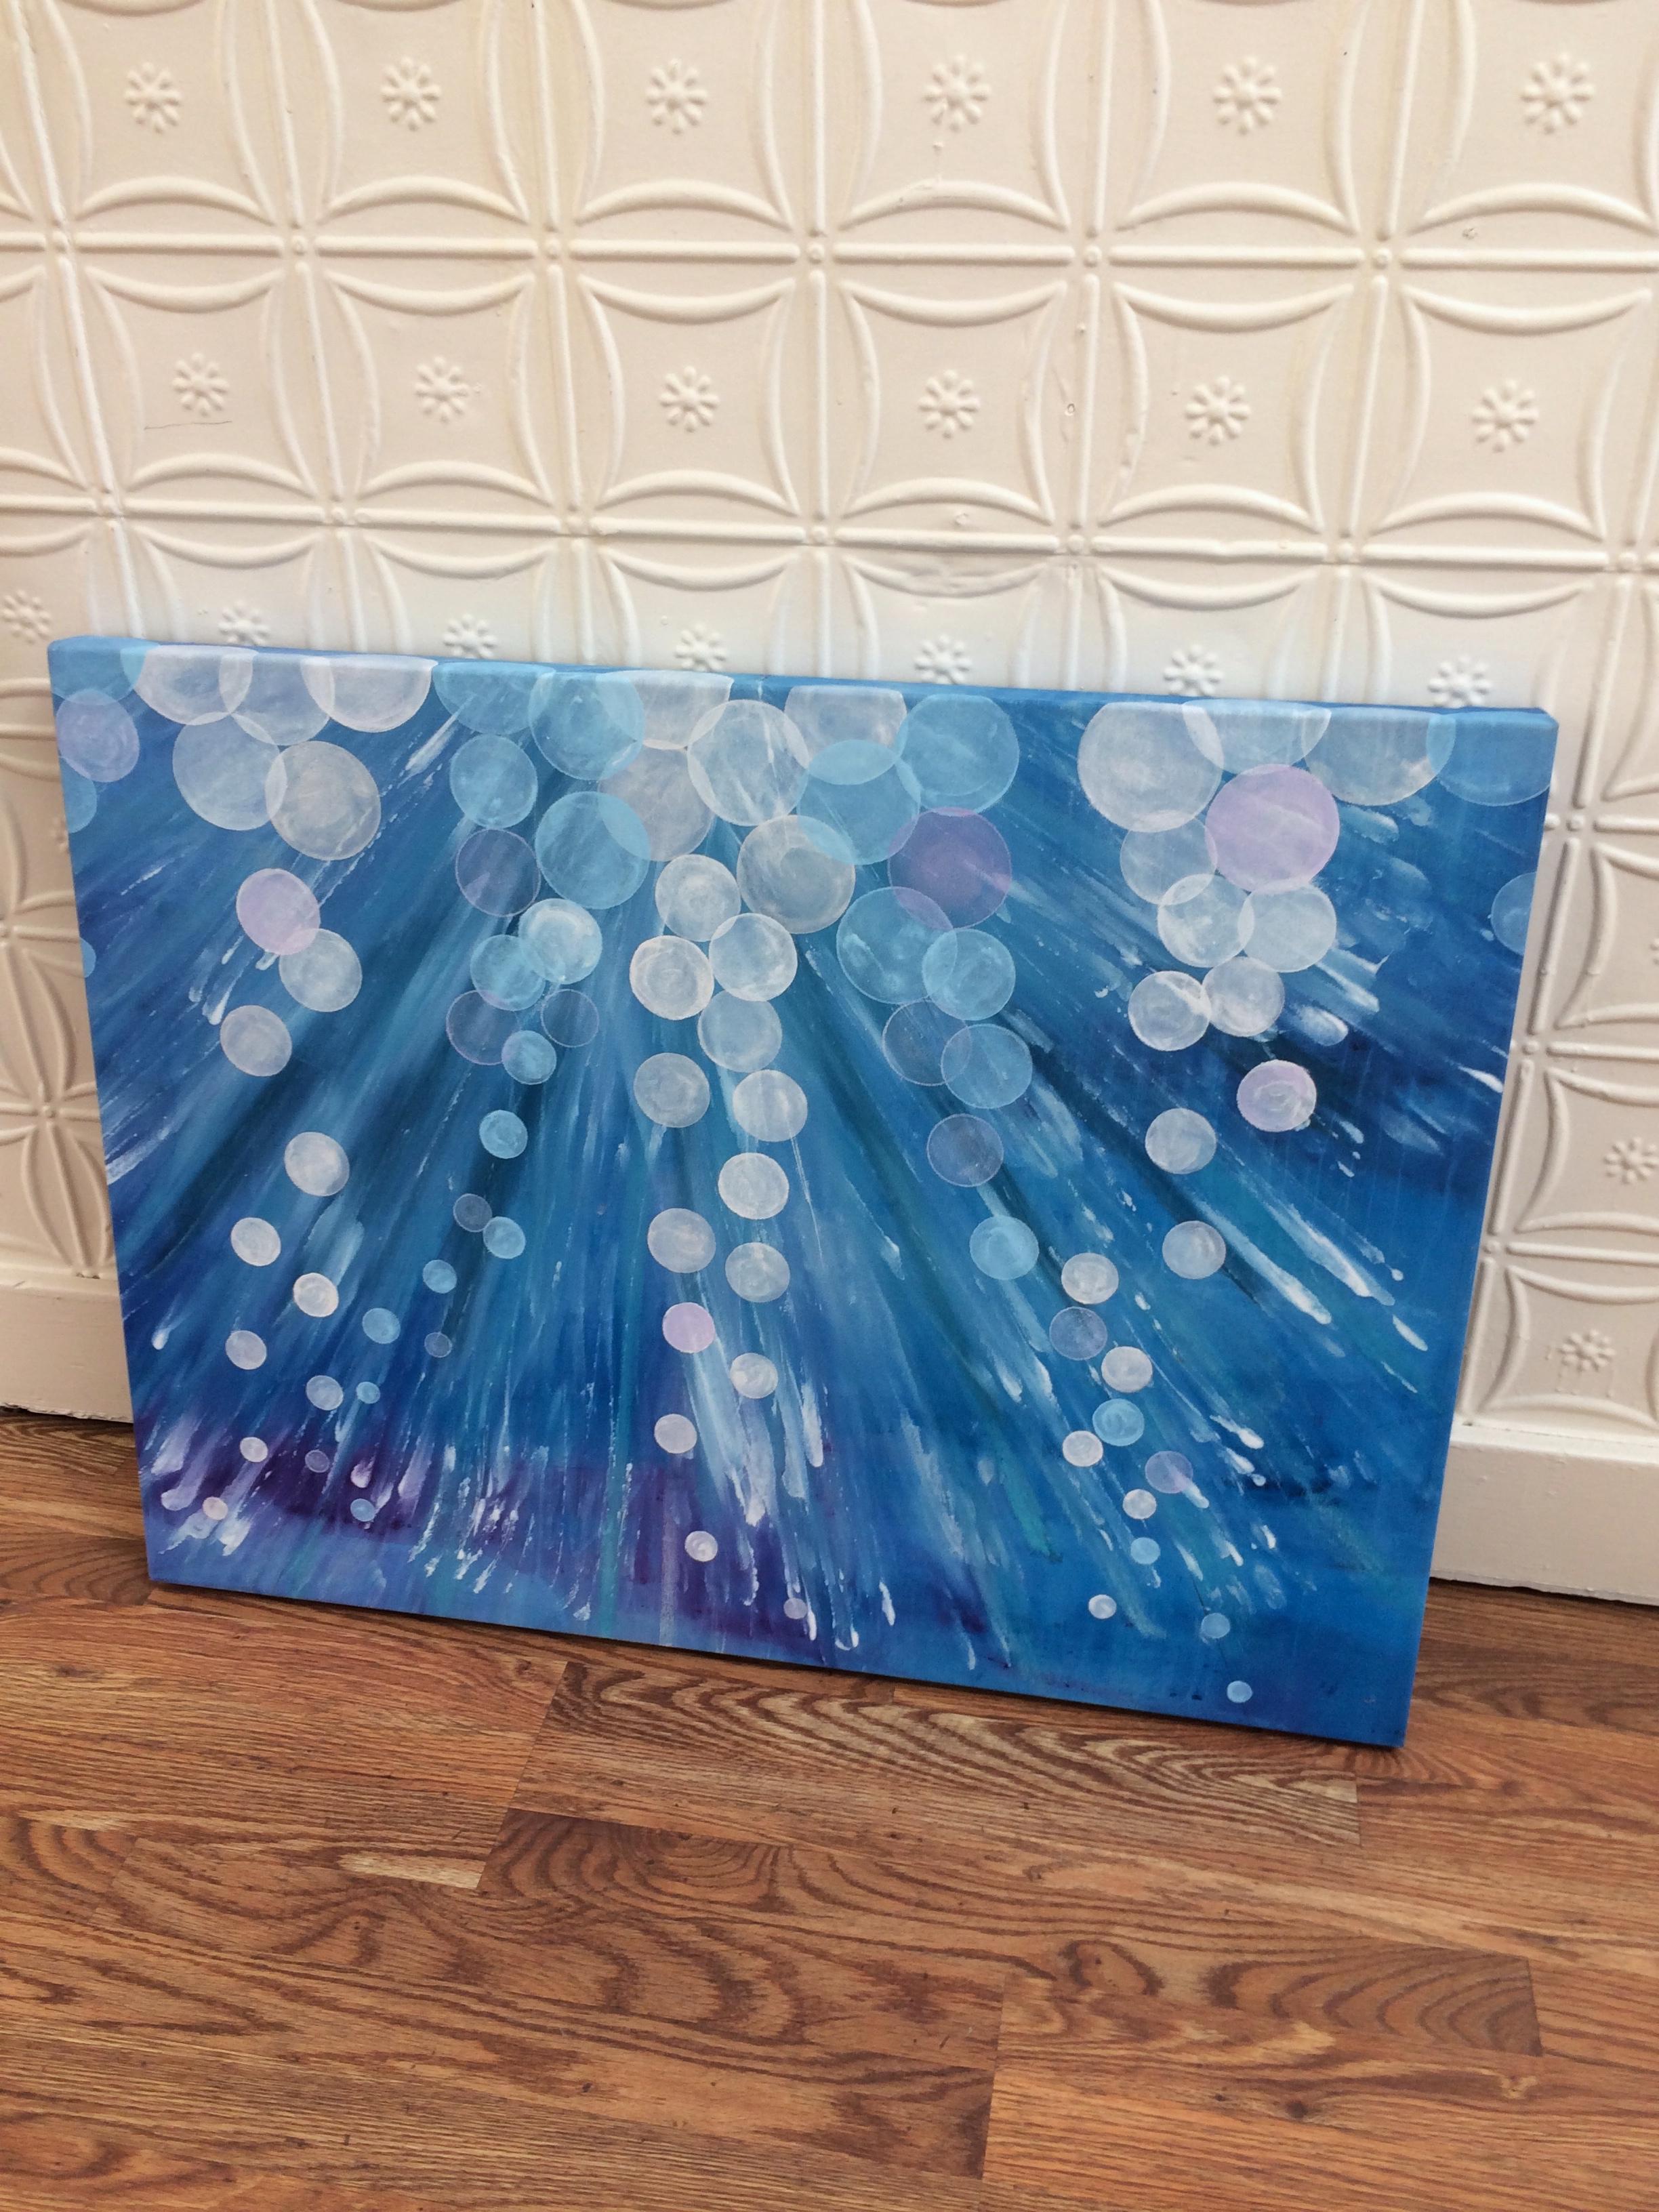 SN-1001 18 (Bubbles) - Painting by Steven Kinder